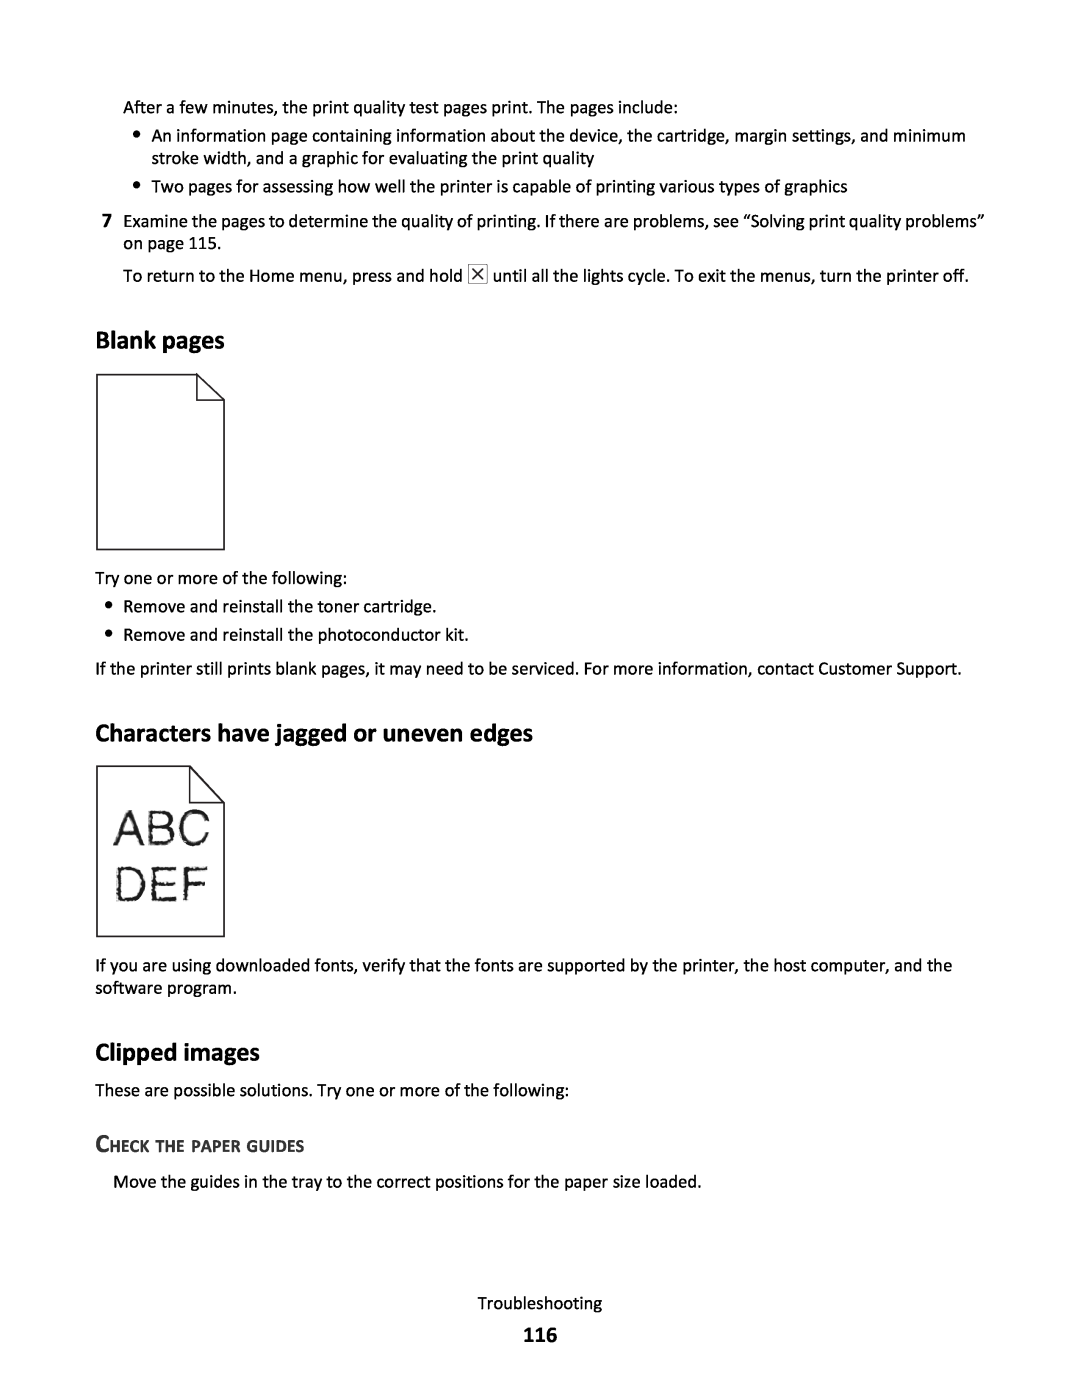 Lexmark 34S0100, 34S0305 manual Blank pages, Characters have jagged or uneven edges, Clipped images, Check The Paper Guides 